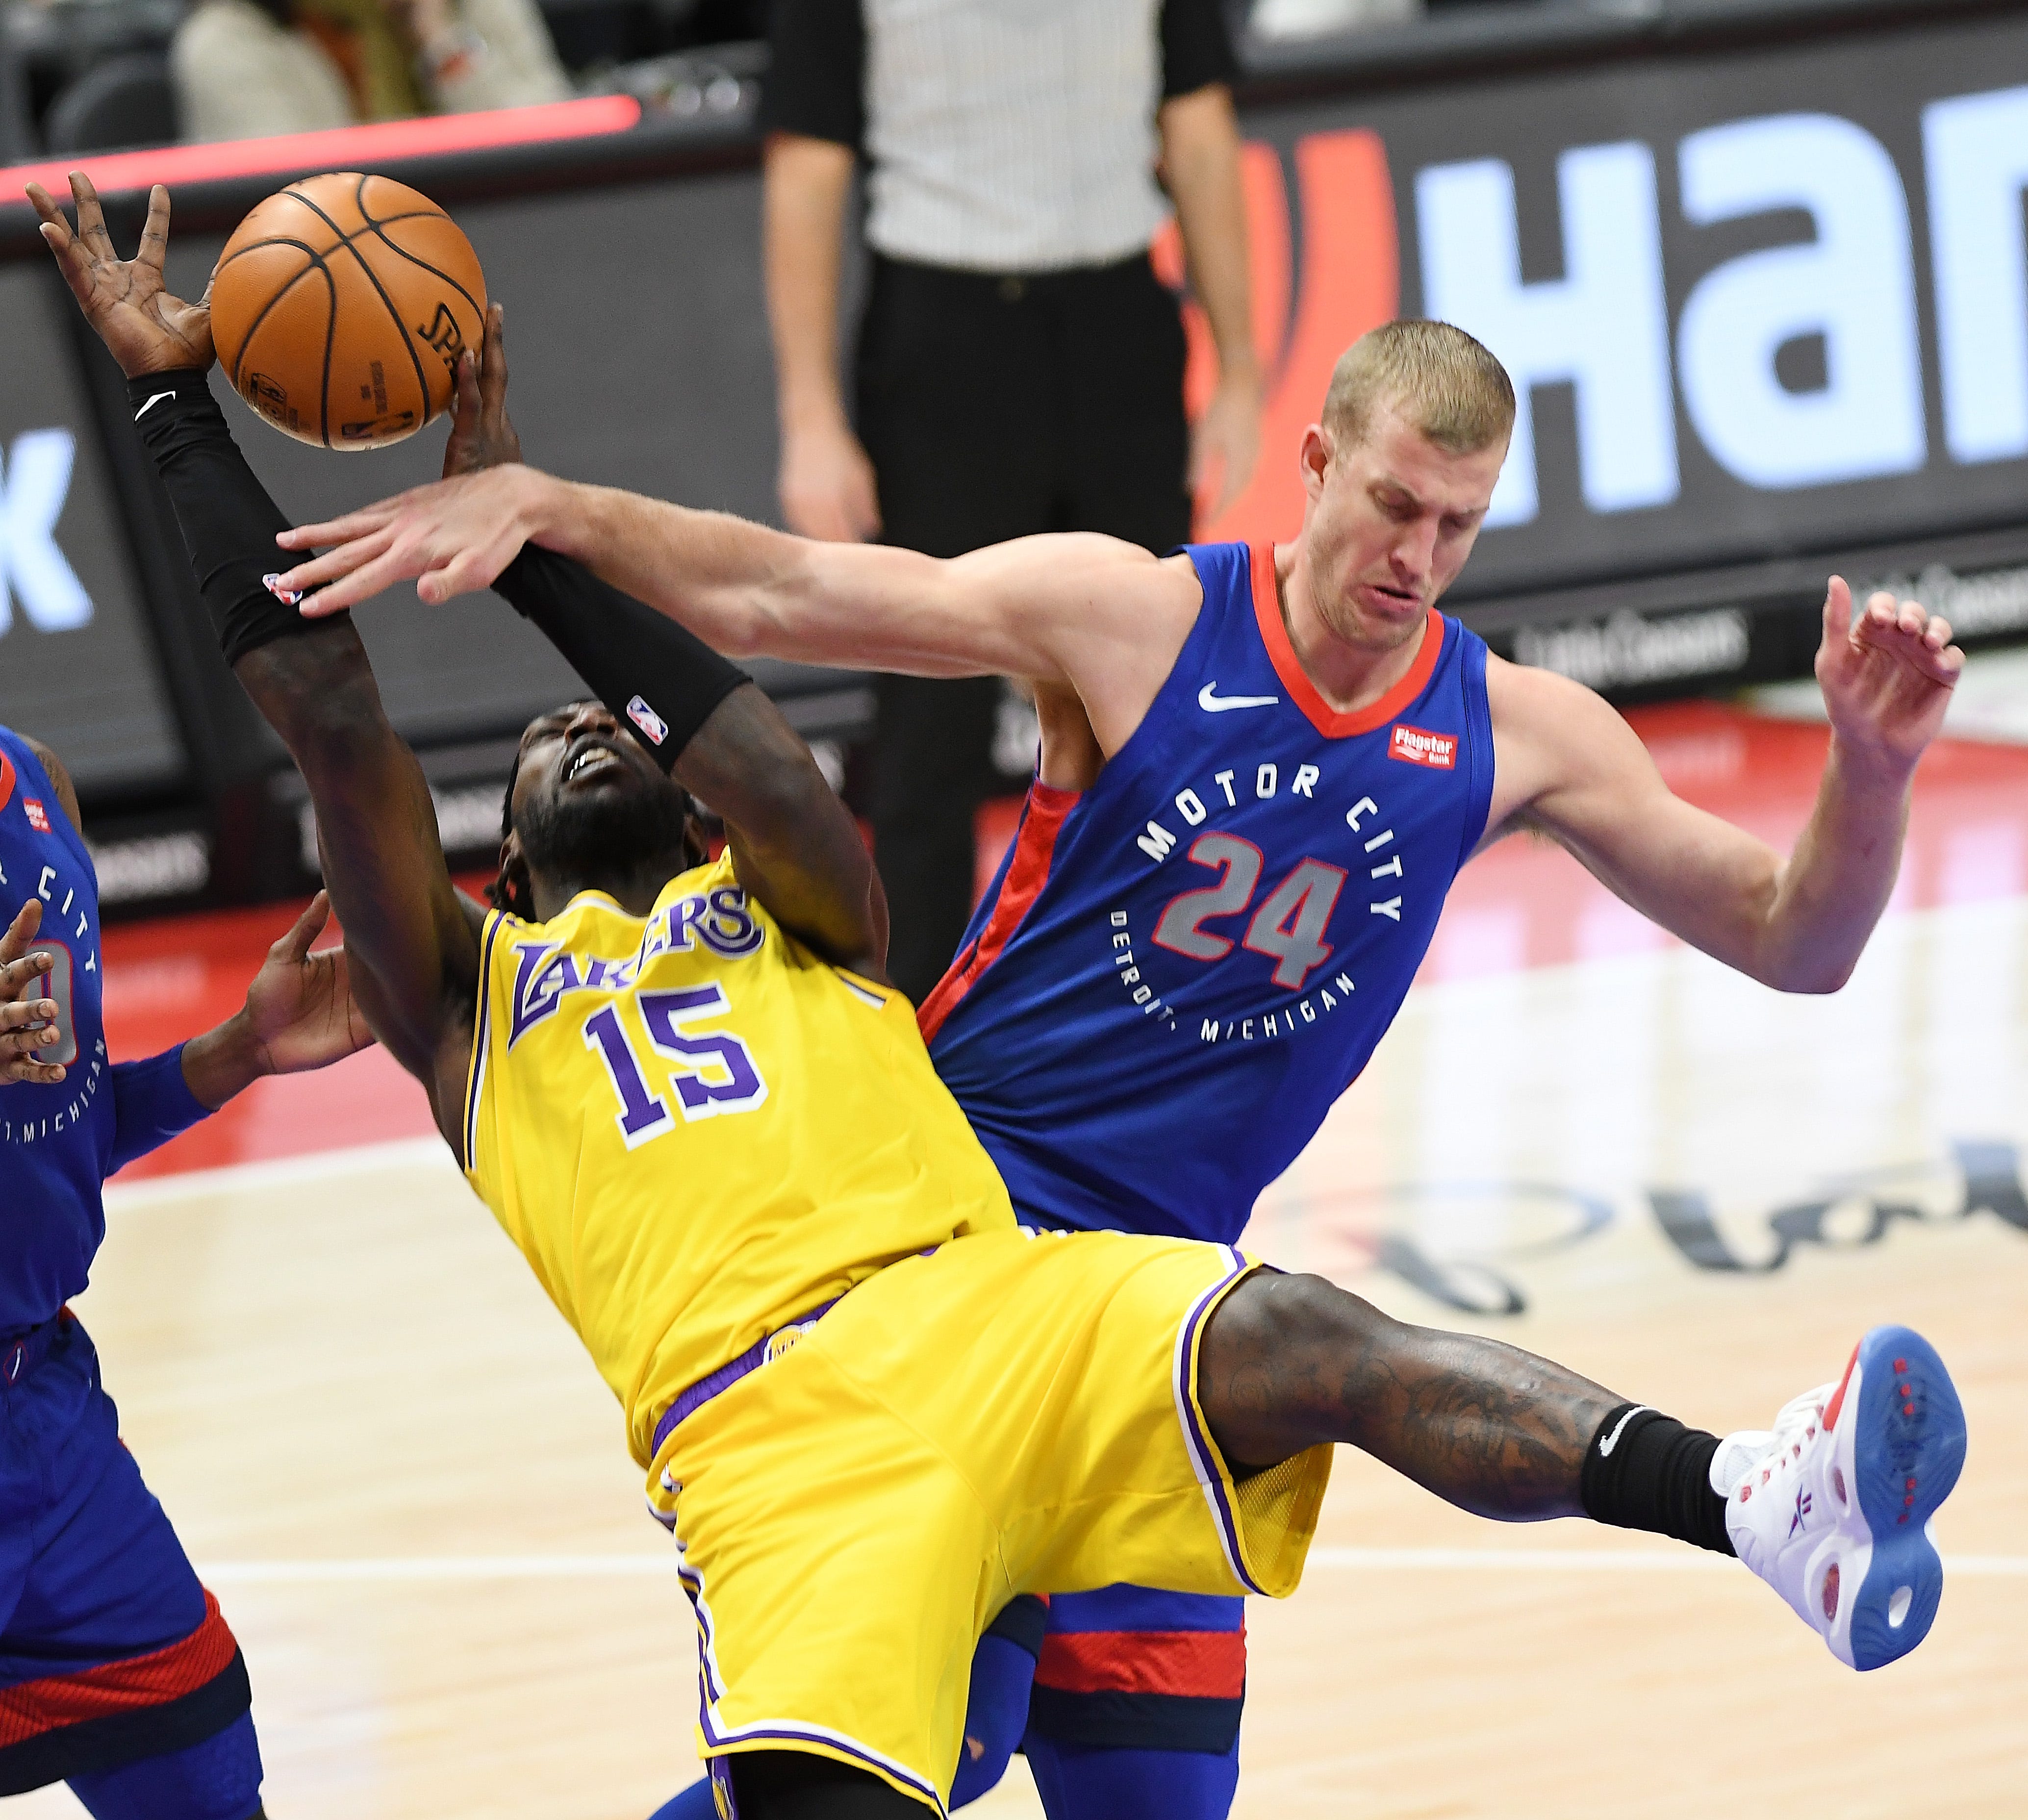 Pistons' Mason Plumlee knocks down and foul Lakers' Montrezl Harrell in the fourth quarter.